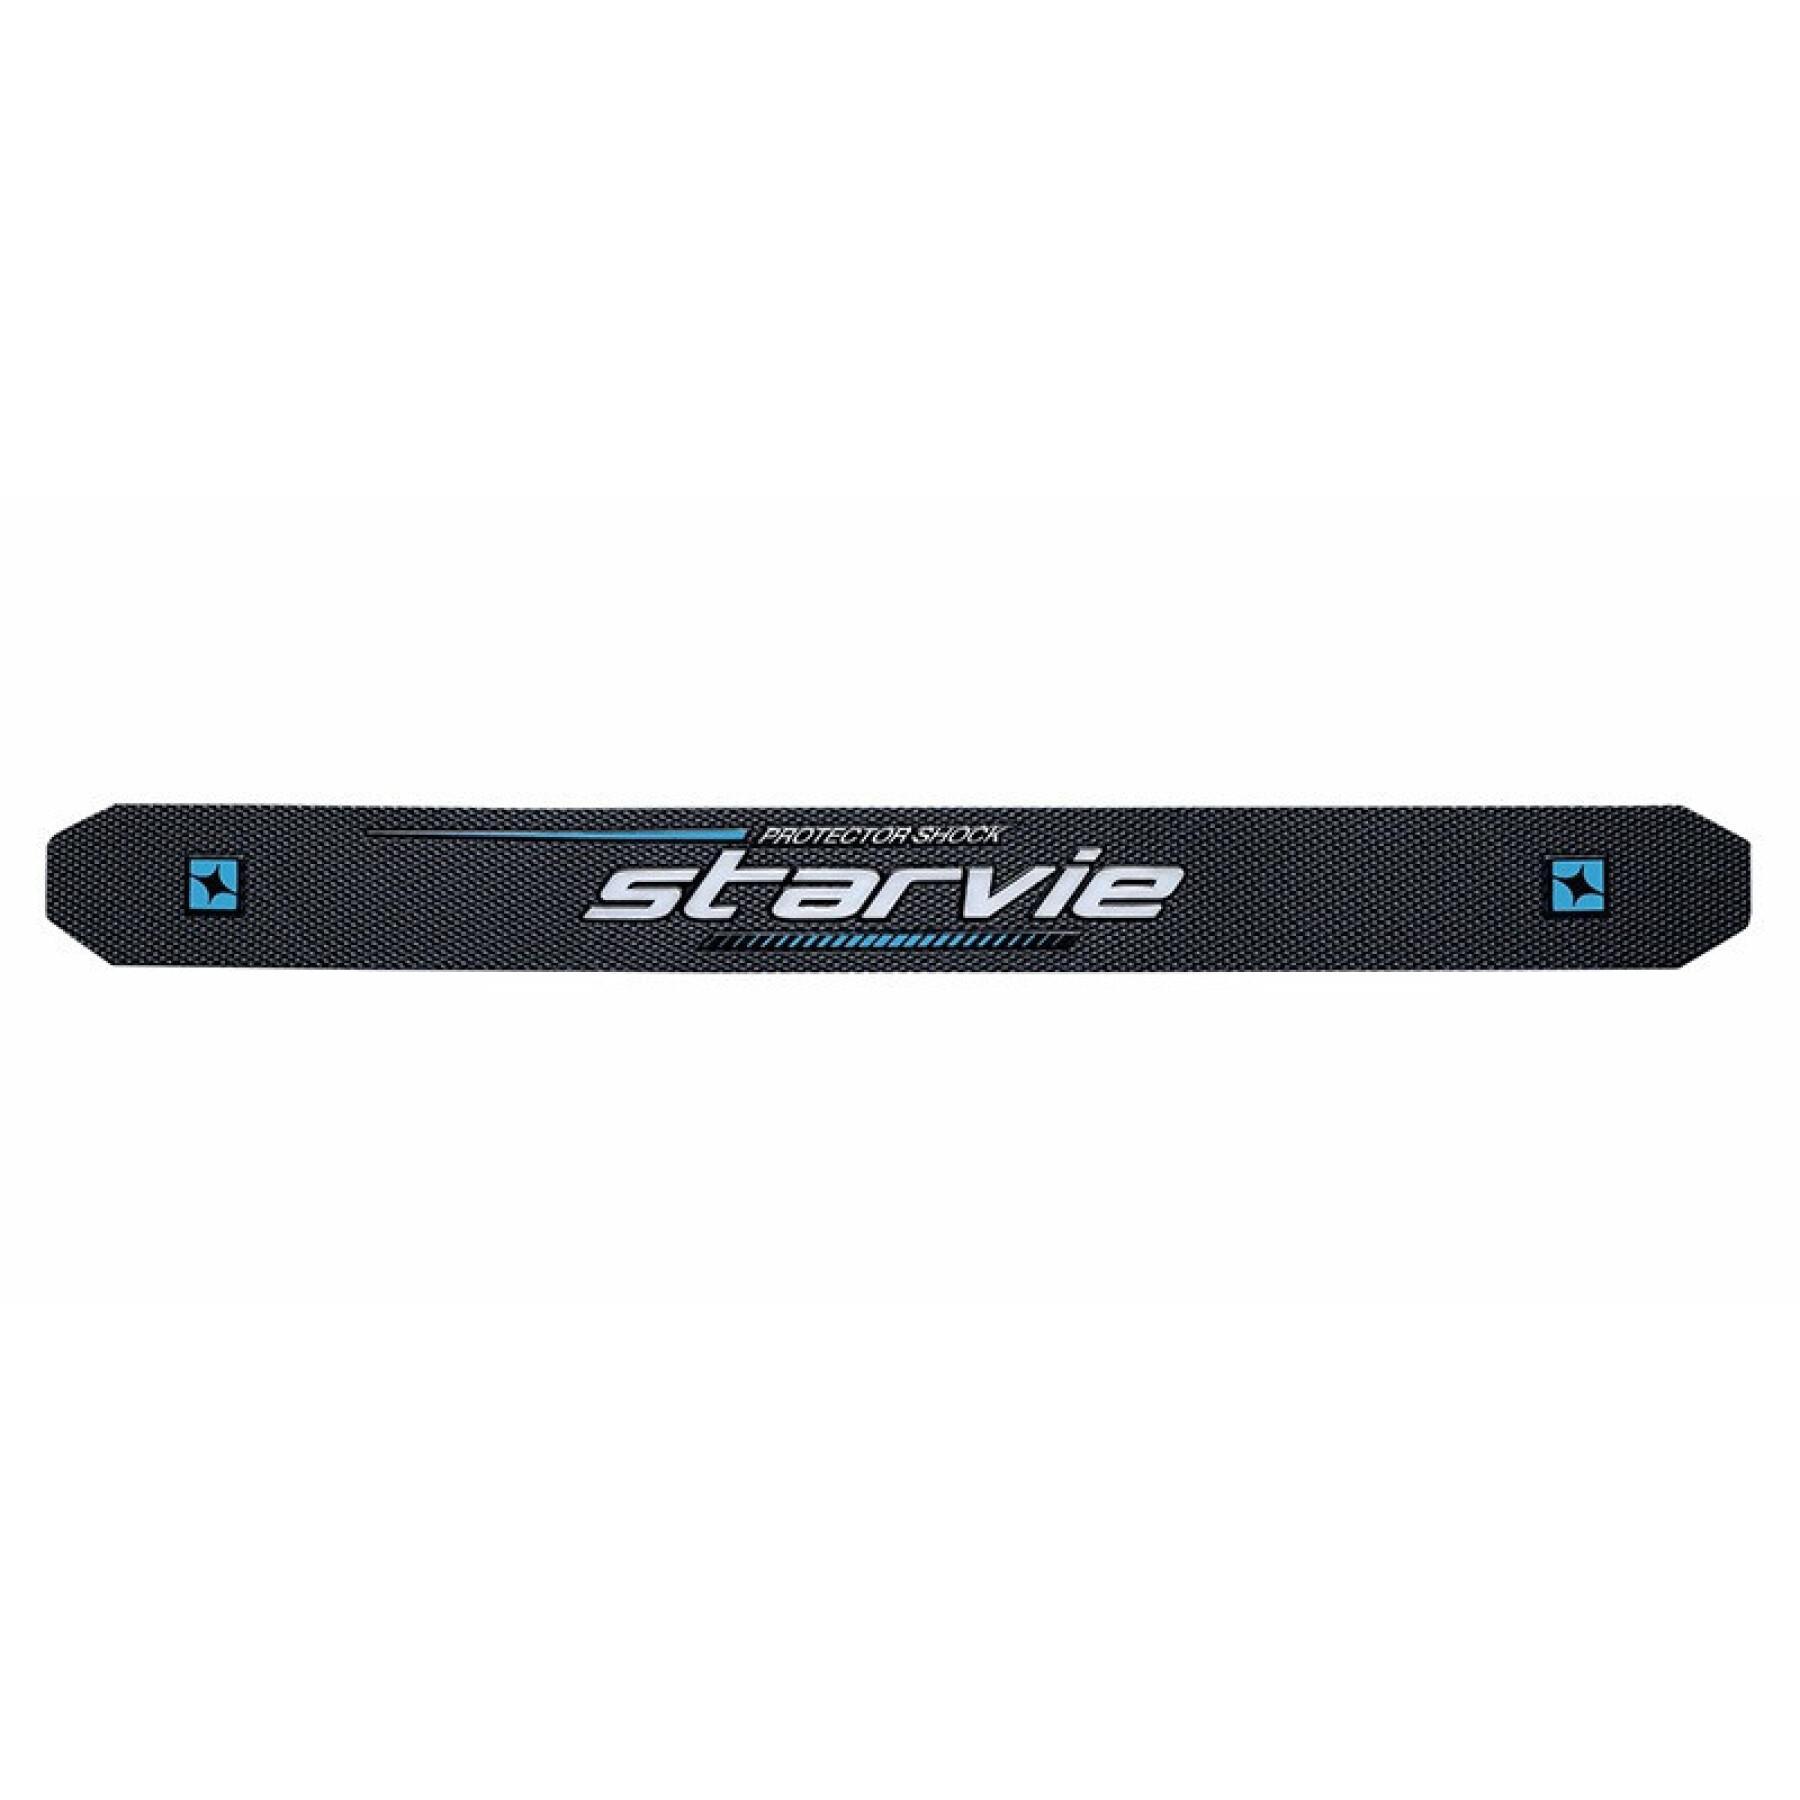 Racket protection from padel Starvie